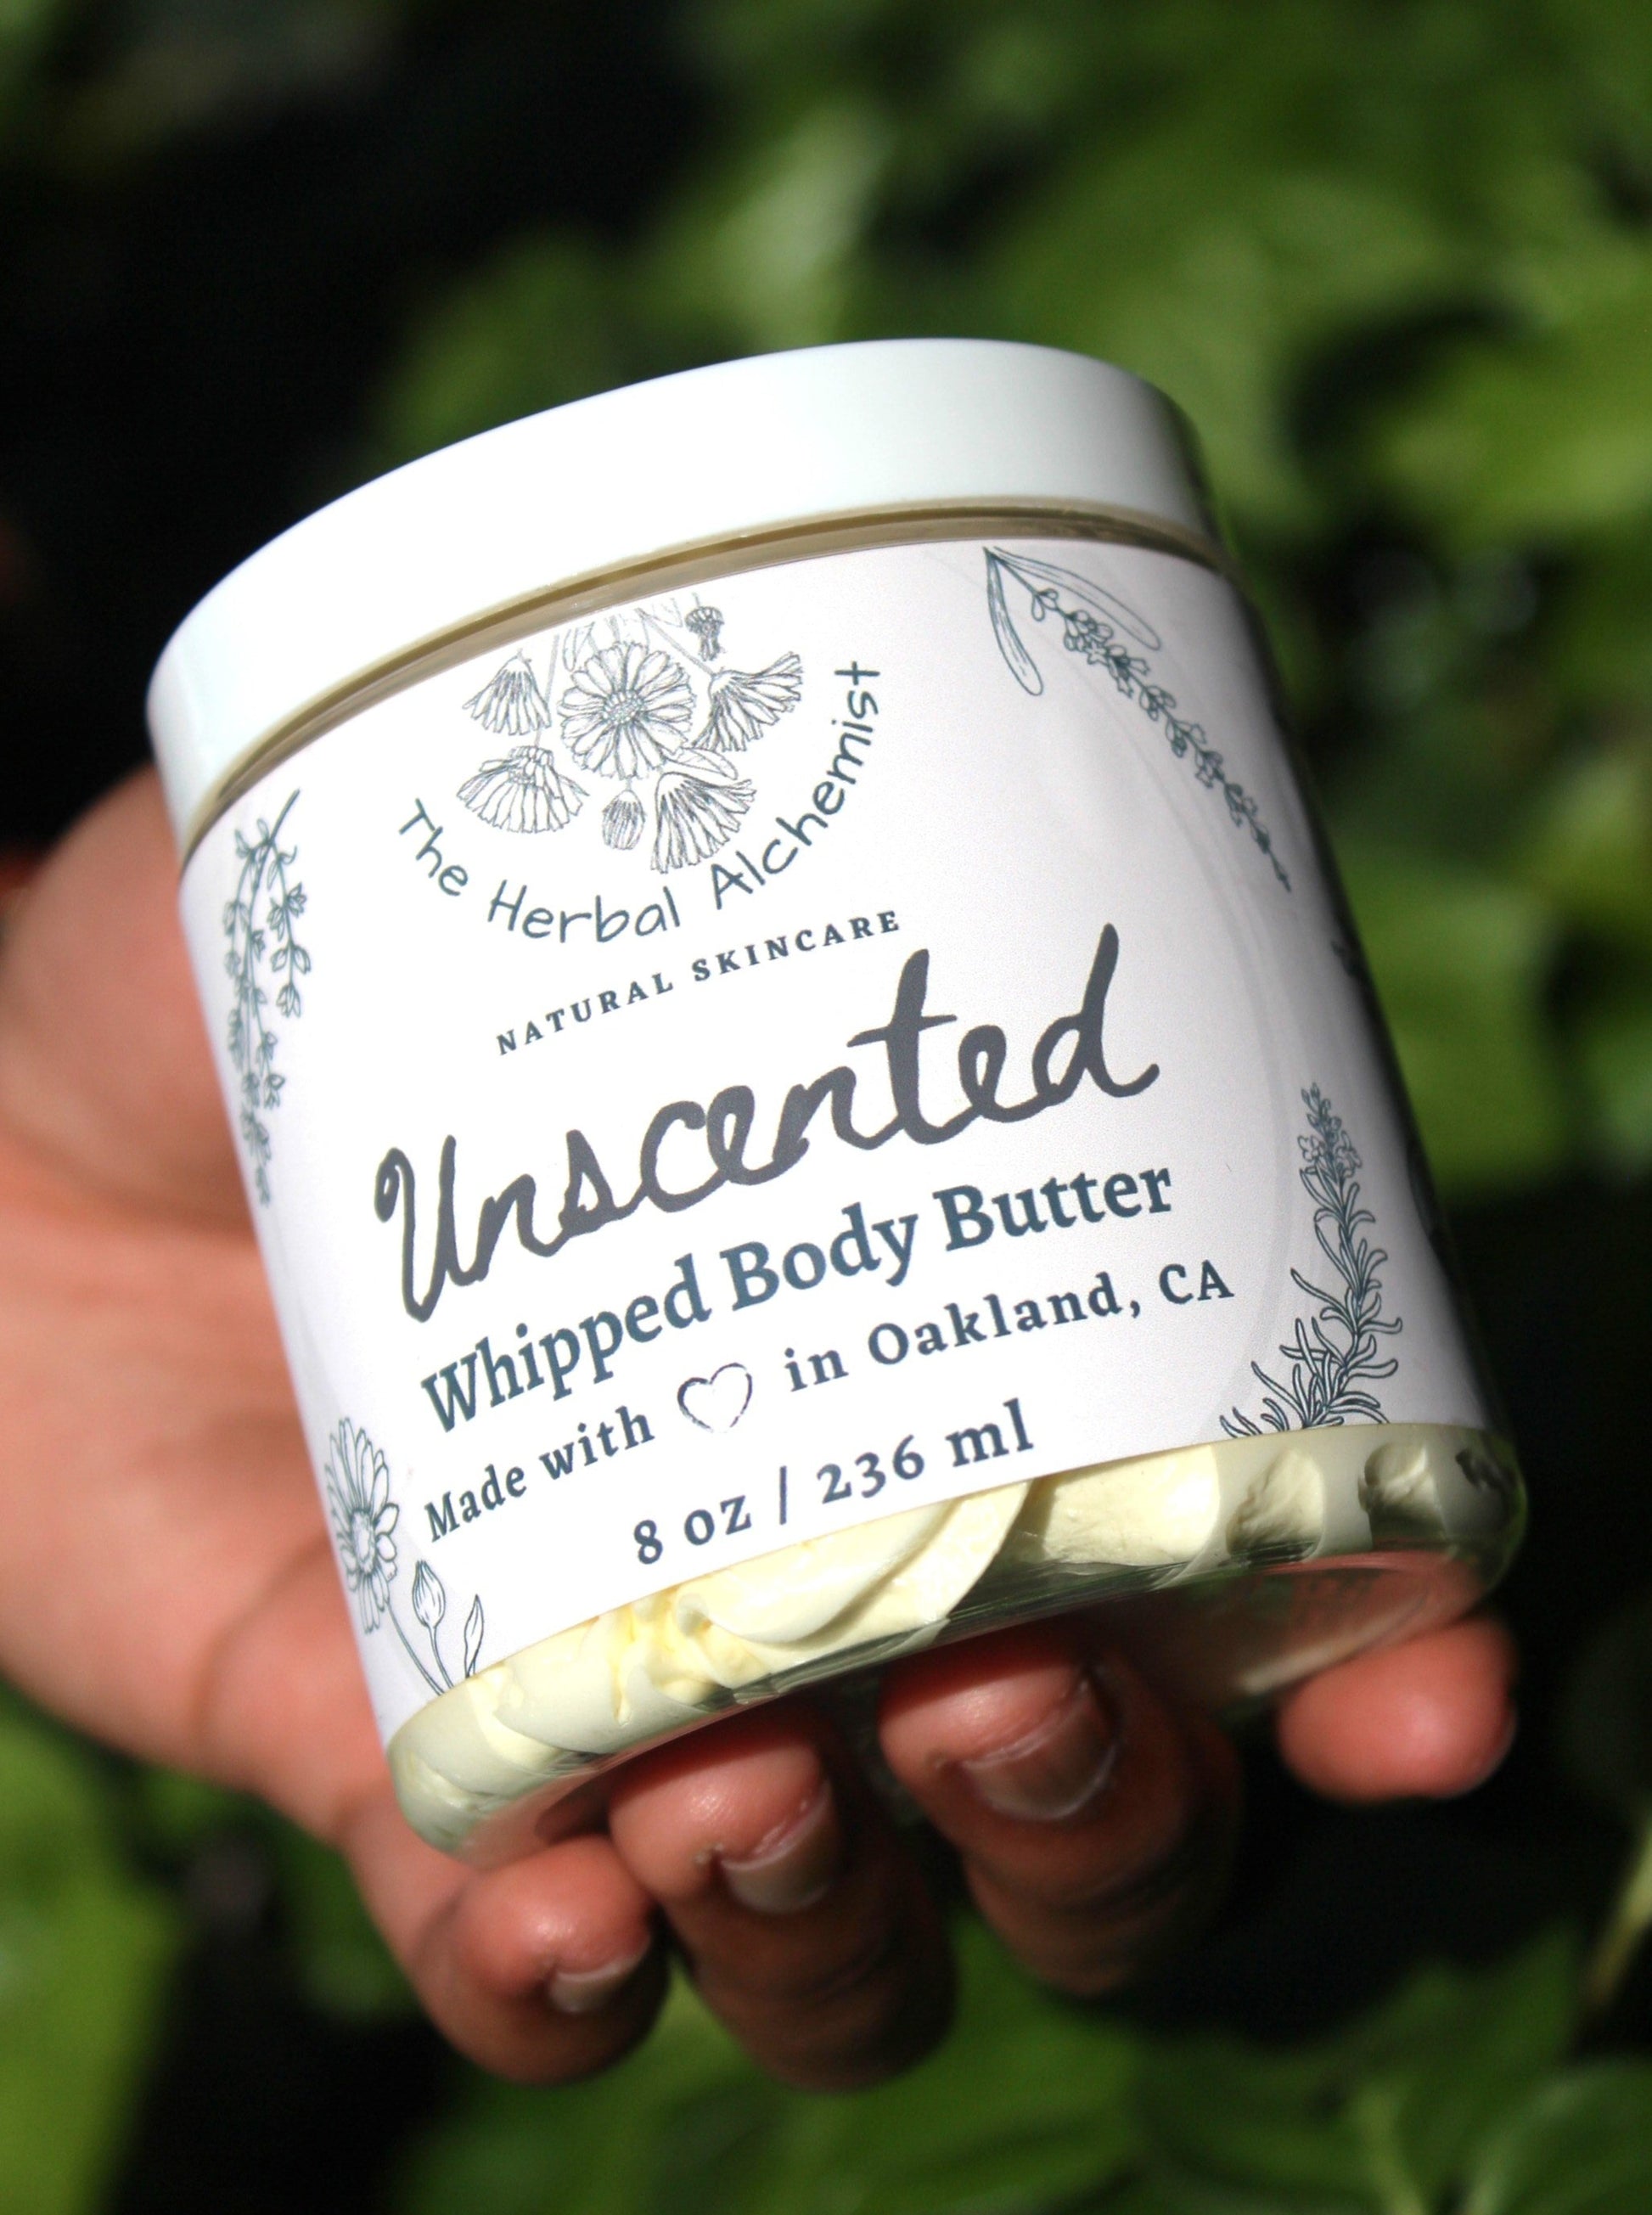 A jar of unscented whipped body butter made with organic raw cocoa butter, unrefined shea butter, organic coconut oil, organic avocado oil, organic apricot kernel oil, organic wheatgerm oil, organic vitamin E, and organic arrowroot powder.